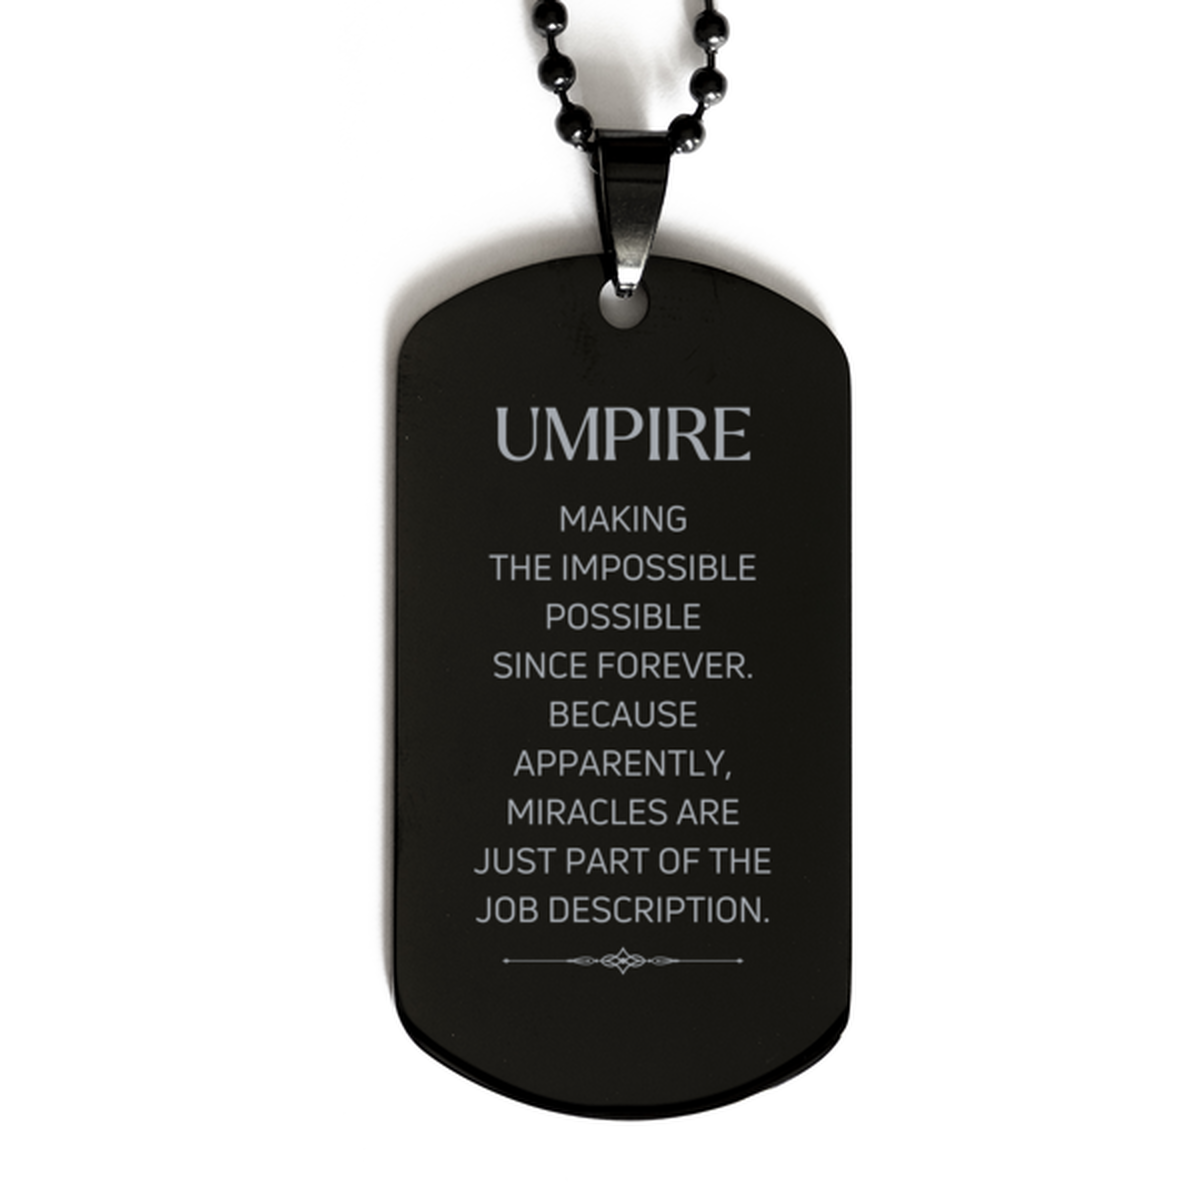 Funny Umpire Gifts, Miracles are just part of the job description, Inspirational Birthday Black Dog Tag For Umpire, Men, Women, Coworkers, Friends, Boss